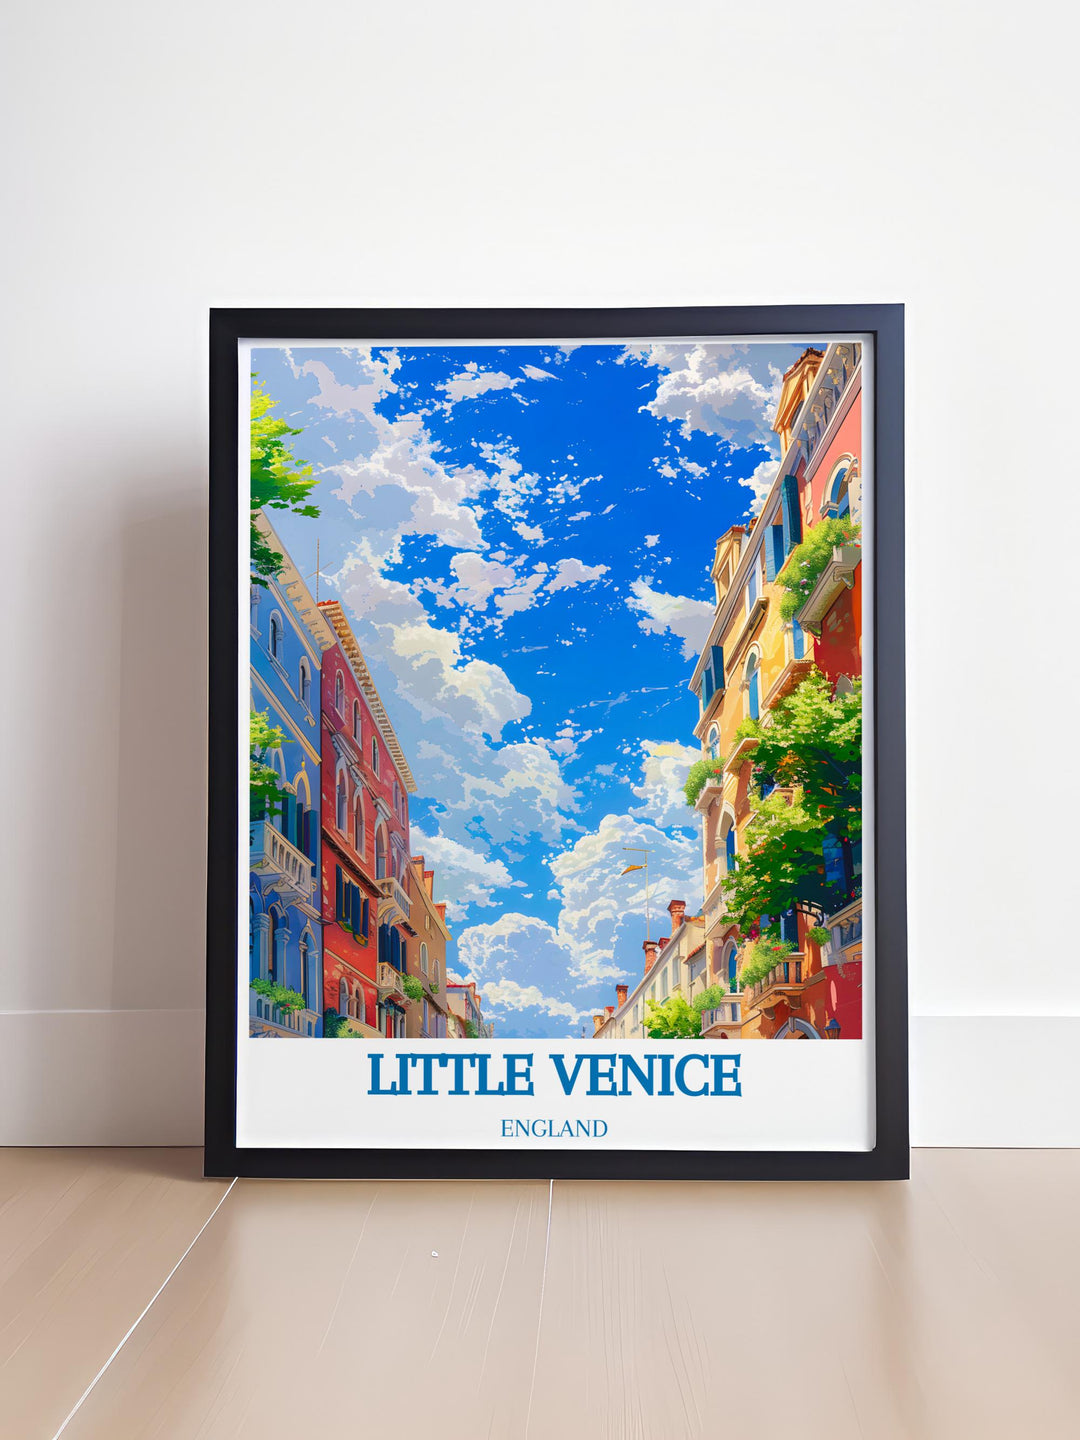 Home decor item featuring Little Venice, perfect for adding a touch of Londons tranquil canal life to your interior.